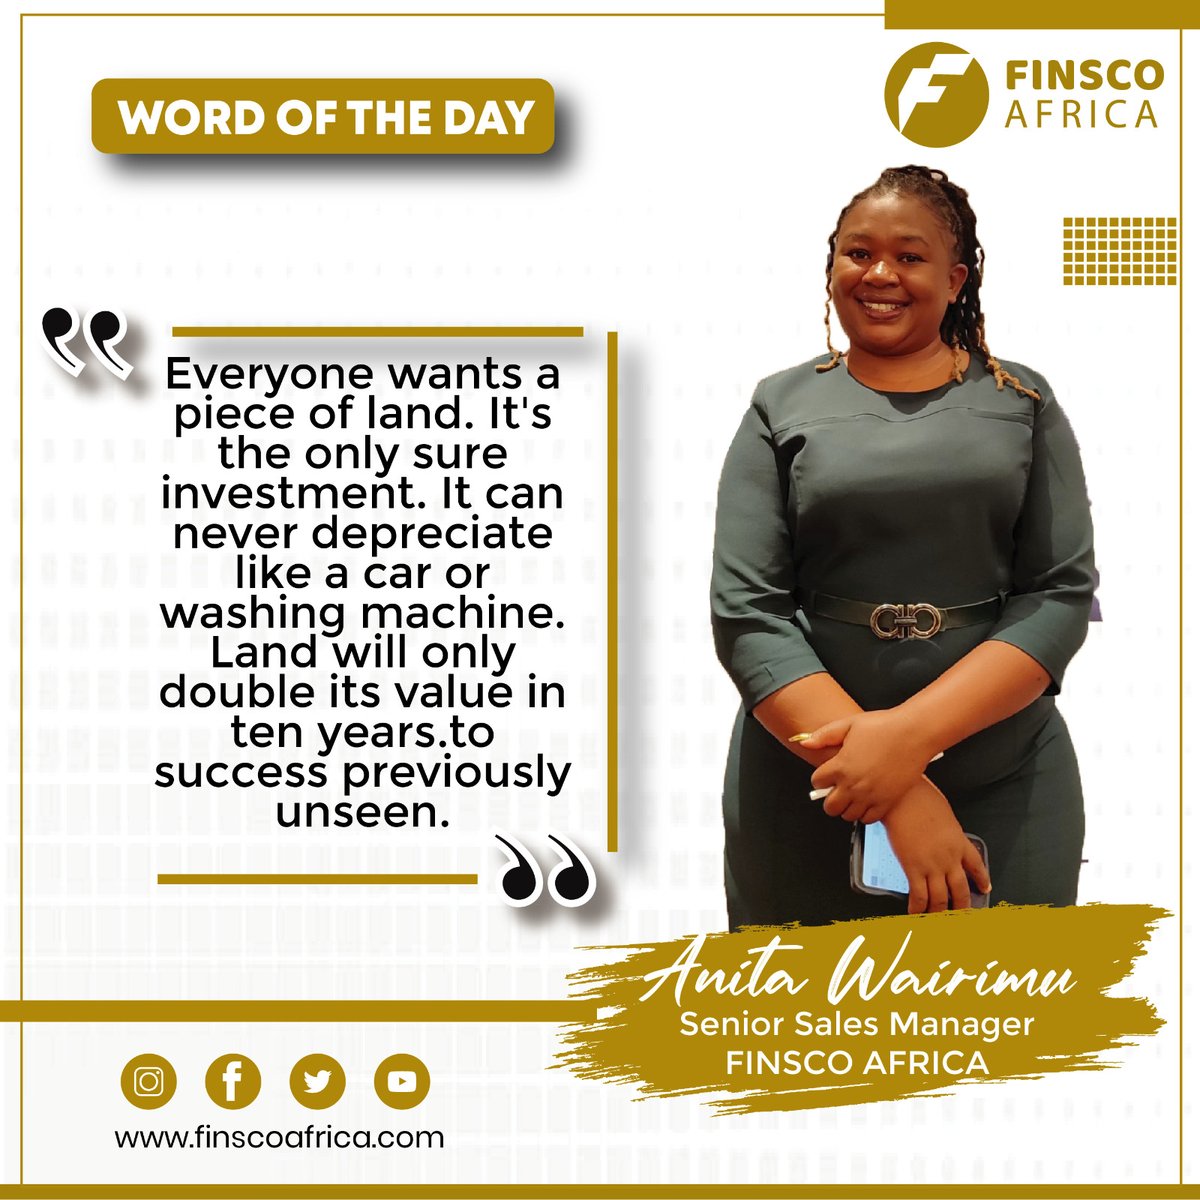 What are your thoughts on this quote?  Is land truly a guaranteed path to wealth?  Share your views in the comments!
#finscoafrica #wordoftheday #motivation #realestate #propertyke